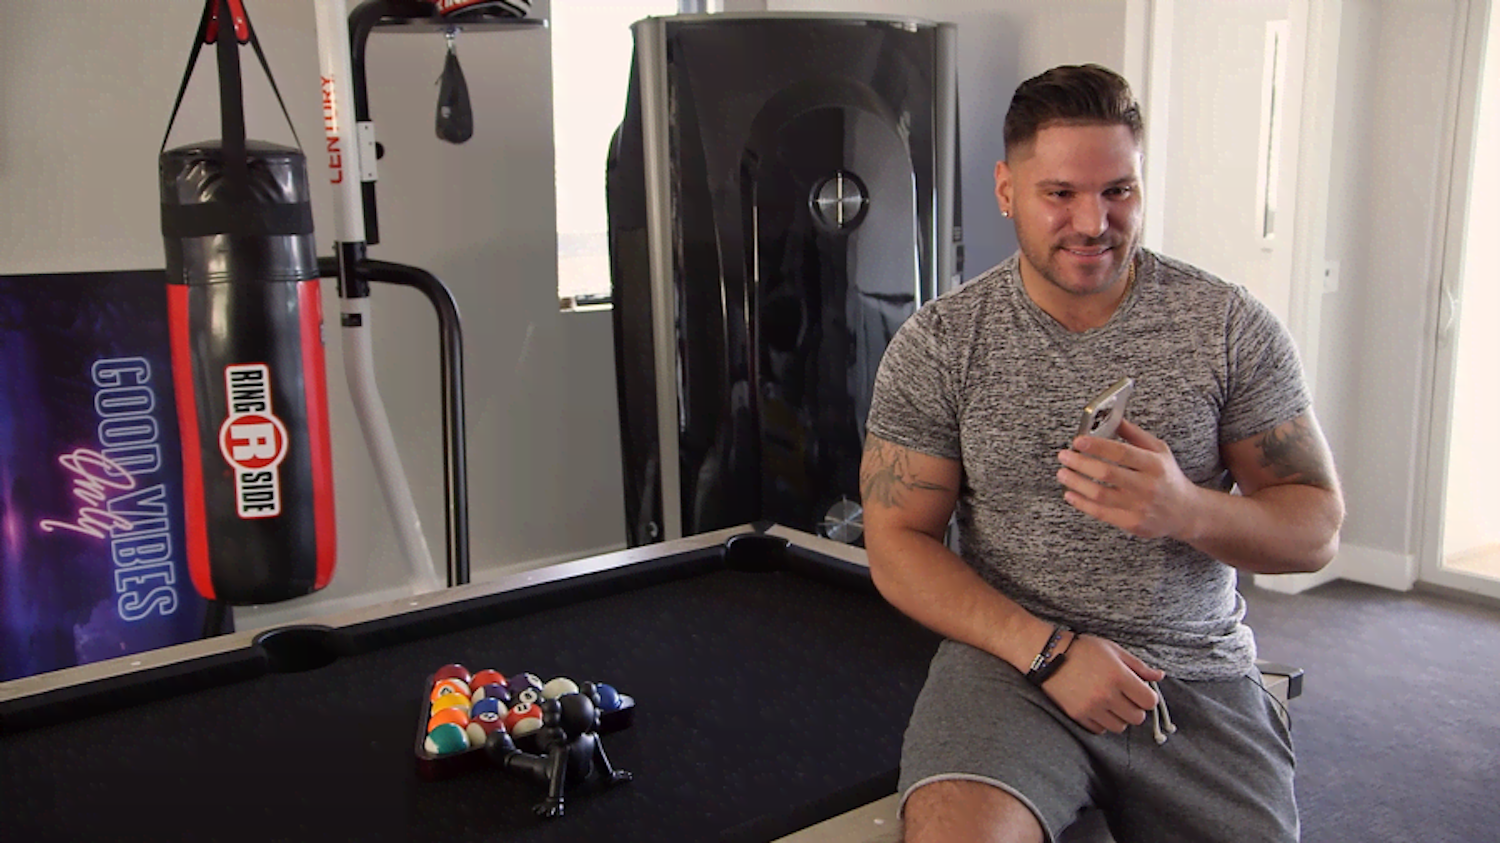 Ronnie Ortiz-Magro Explains His Rehab Journey in ‘Jersey Shore: Family Vacation’ Season 5